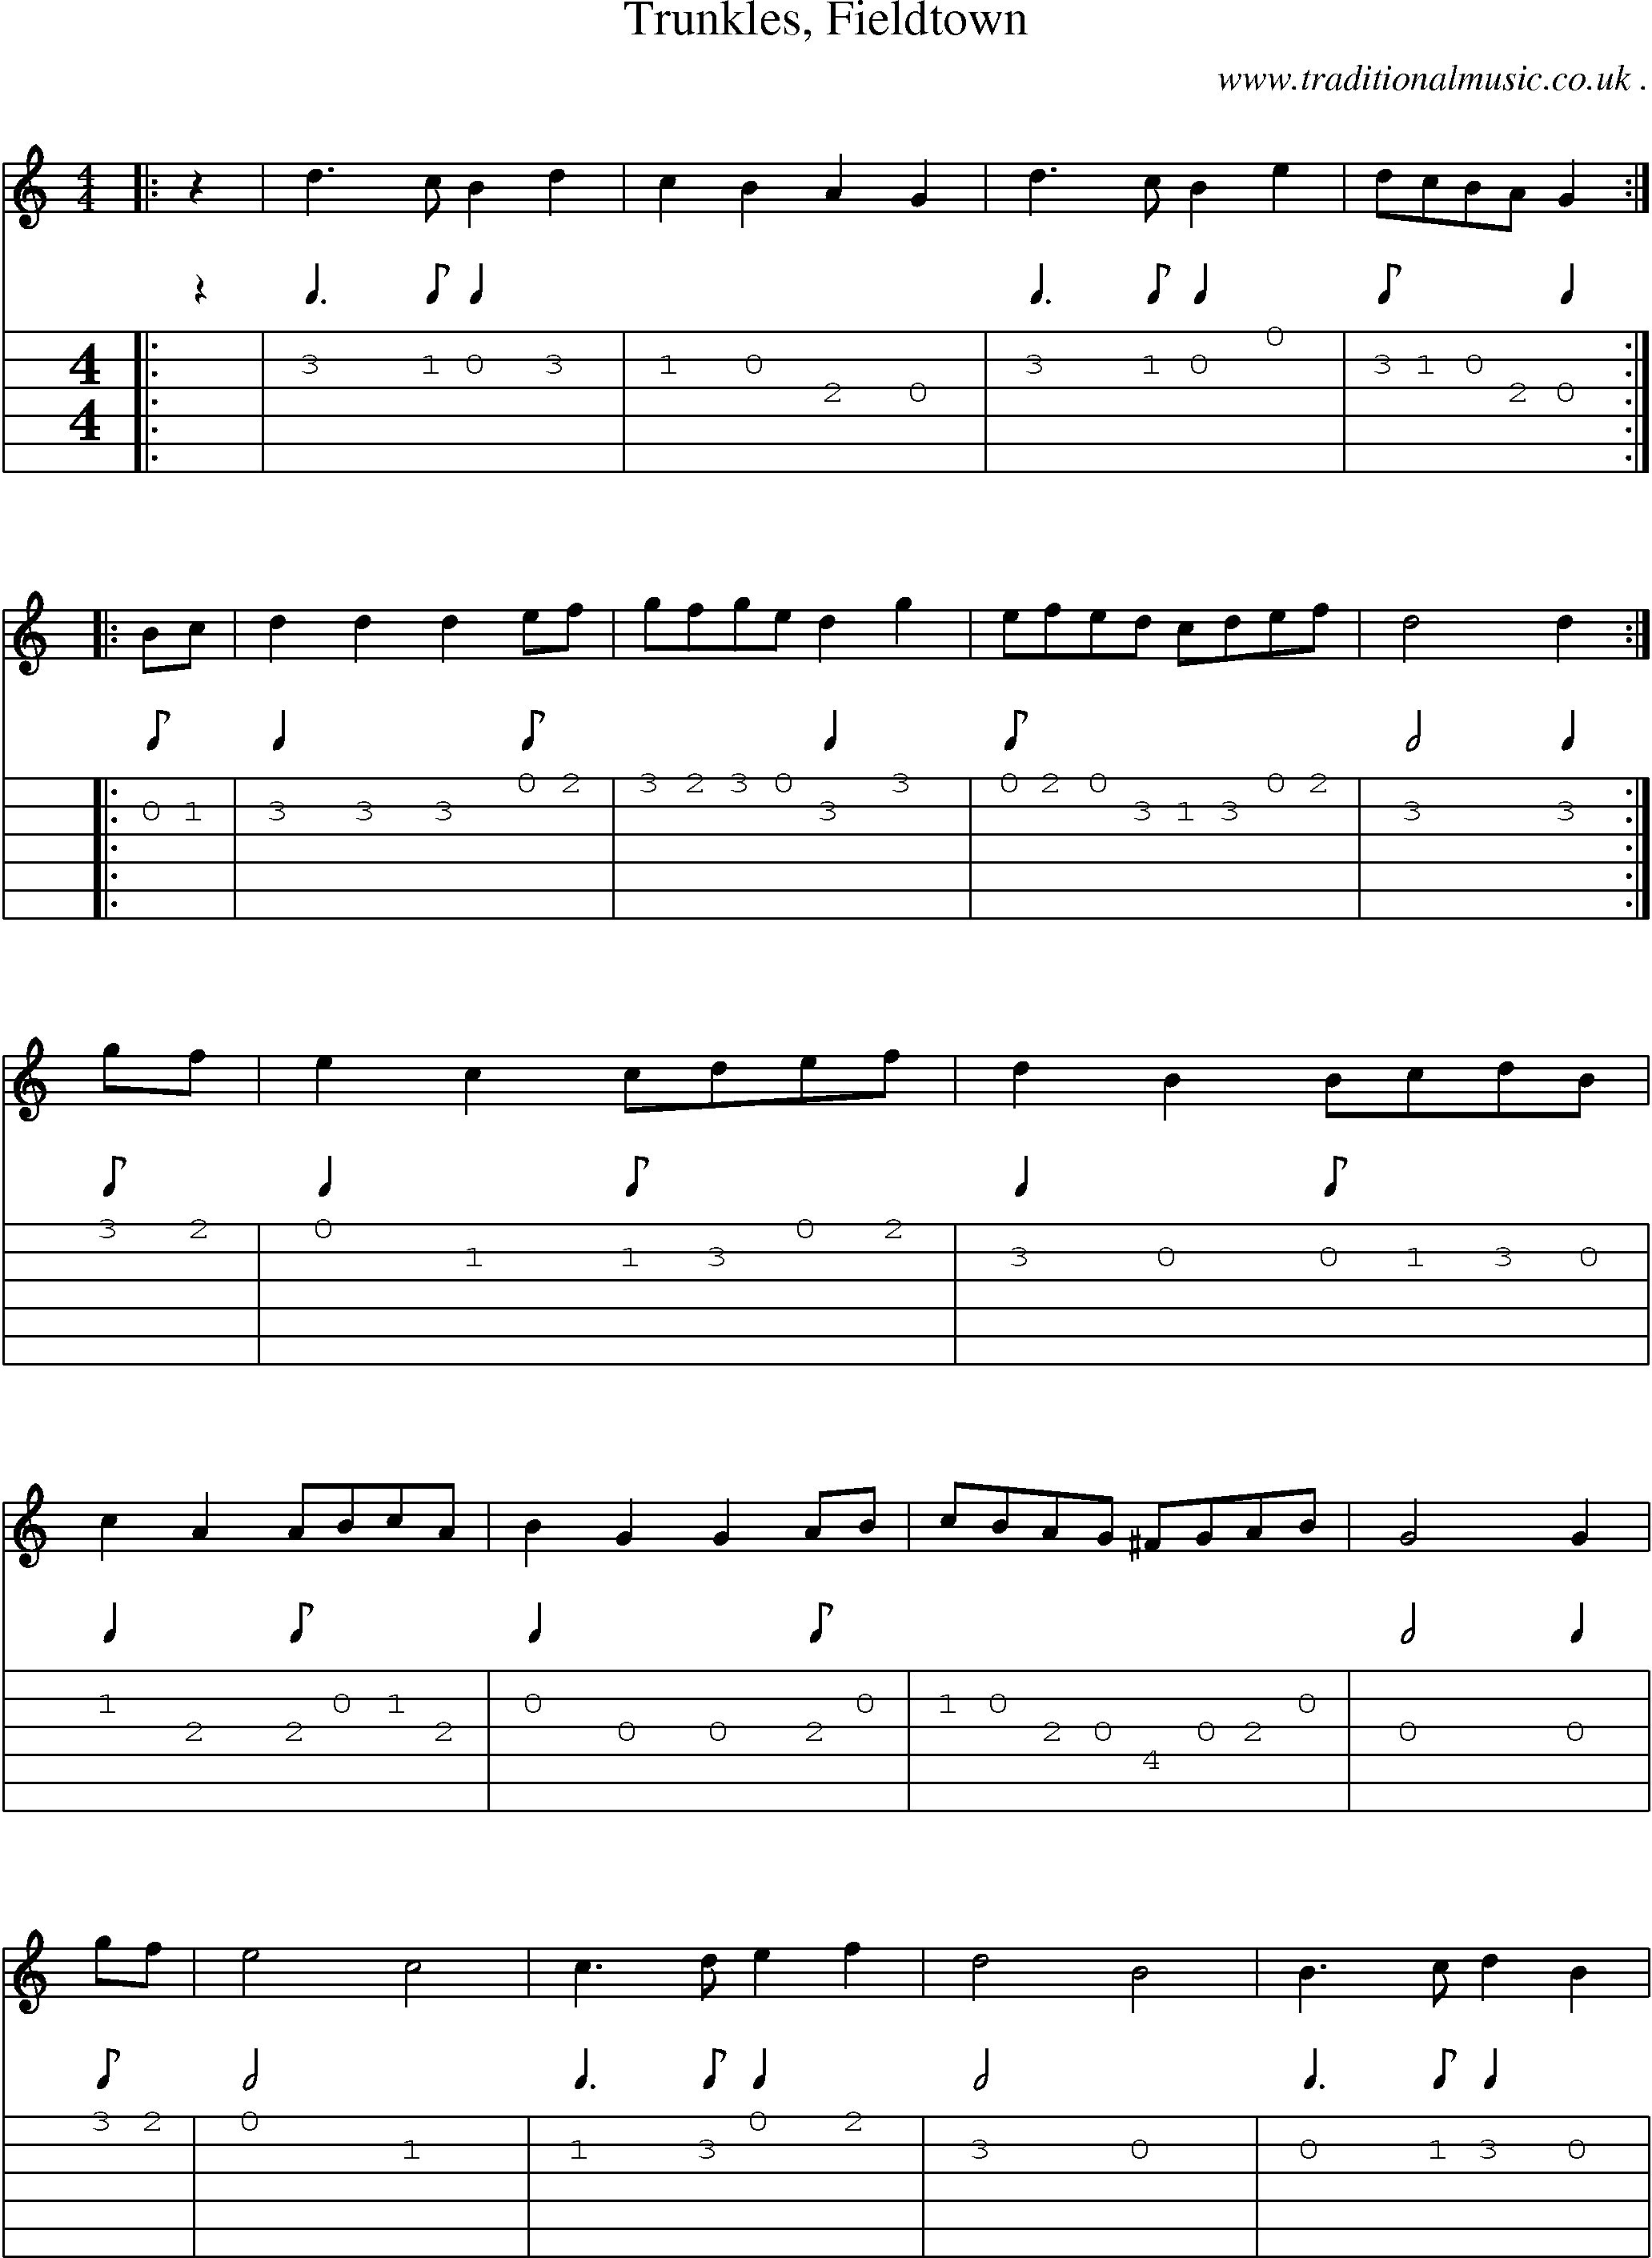 Sheet-Music and Guitar Tabs for Trunkles Fieldtown